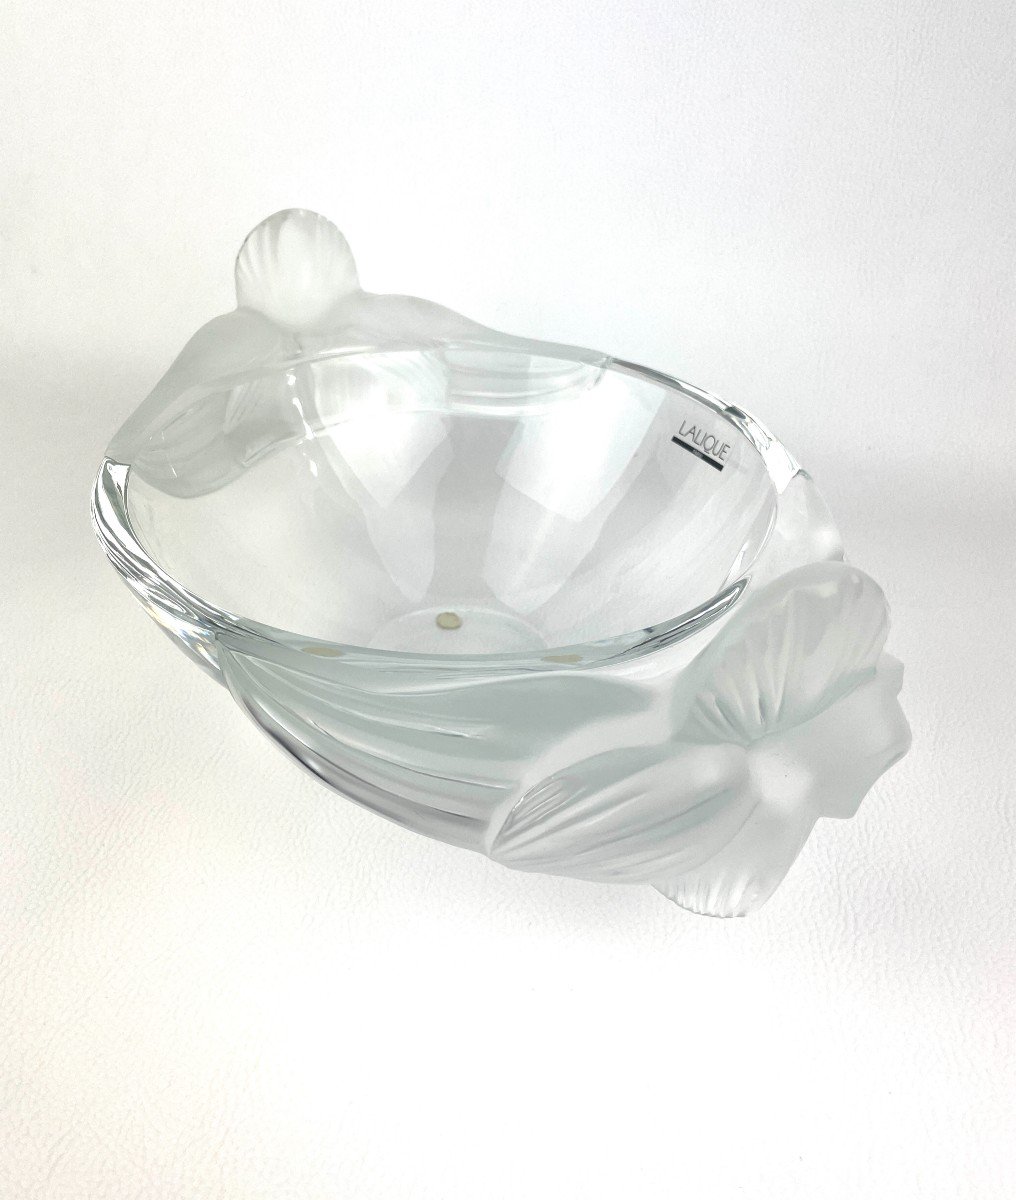 “loriol” Model Cup In Crystal By Lalique France